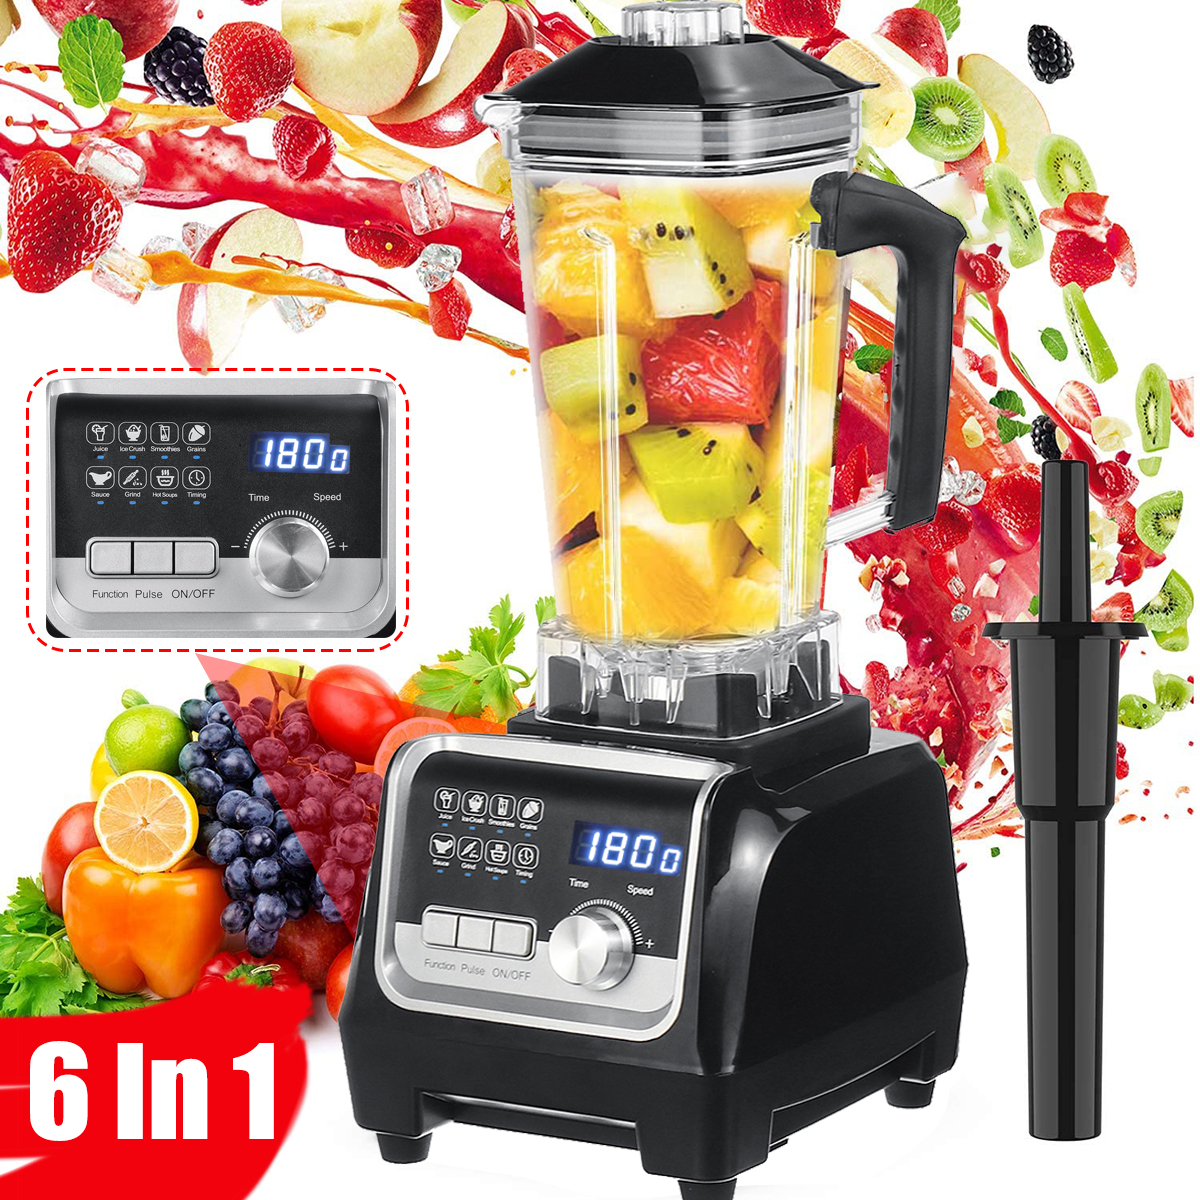 Digital-3HP-BPA-FREE-2L-Automatic-Touchpad-Professional-Blender-Mixer-Juicer-1848947-3